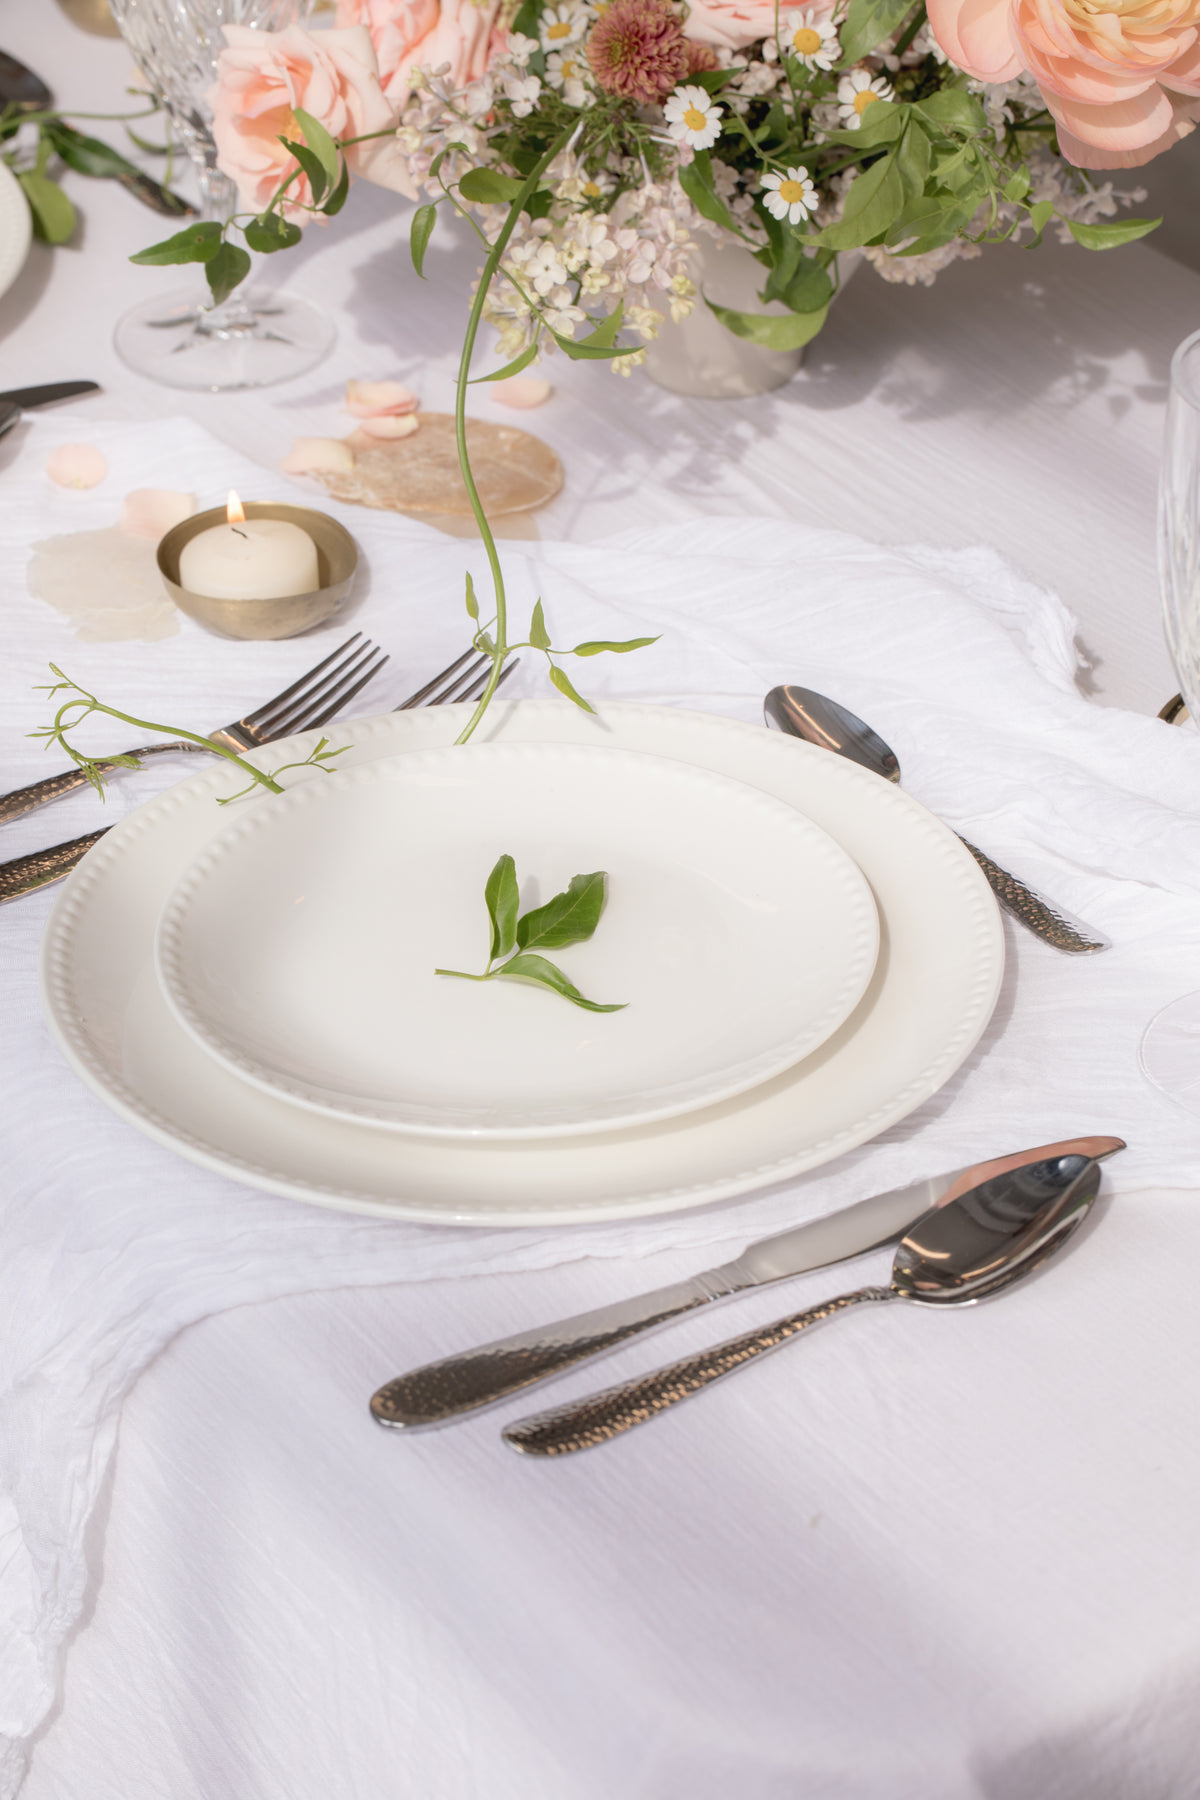 place setting at a decorated table